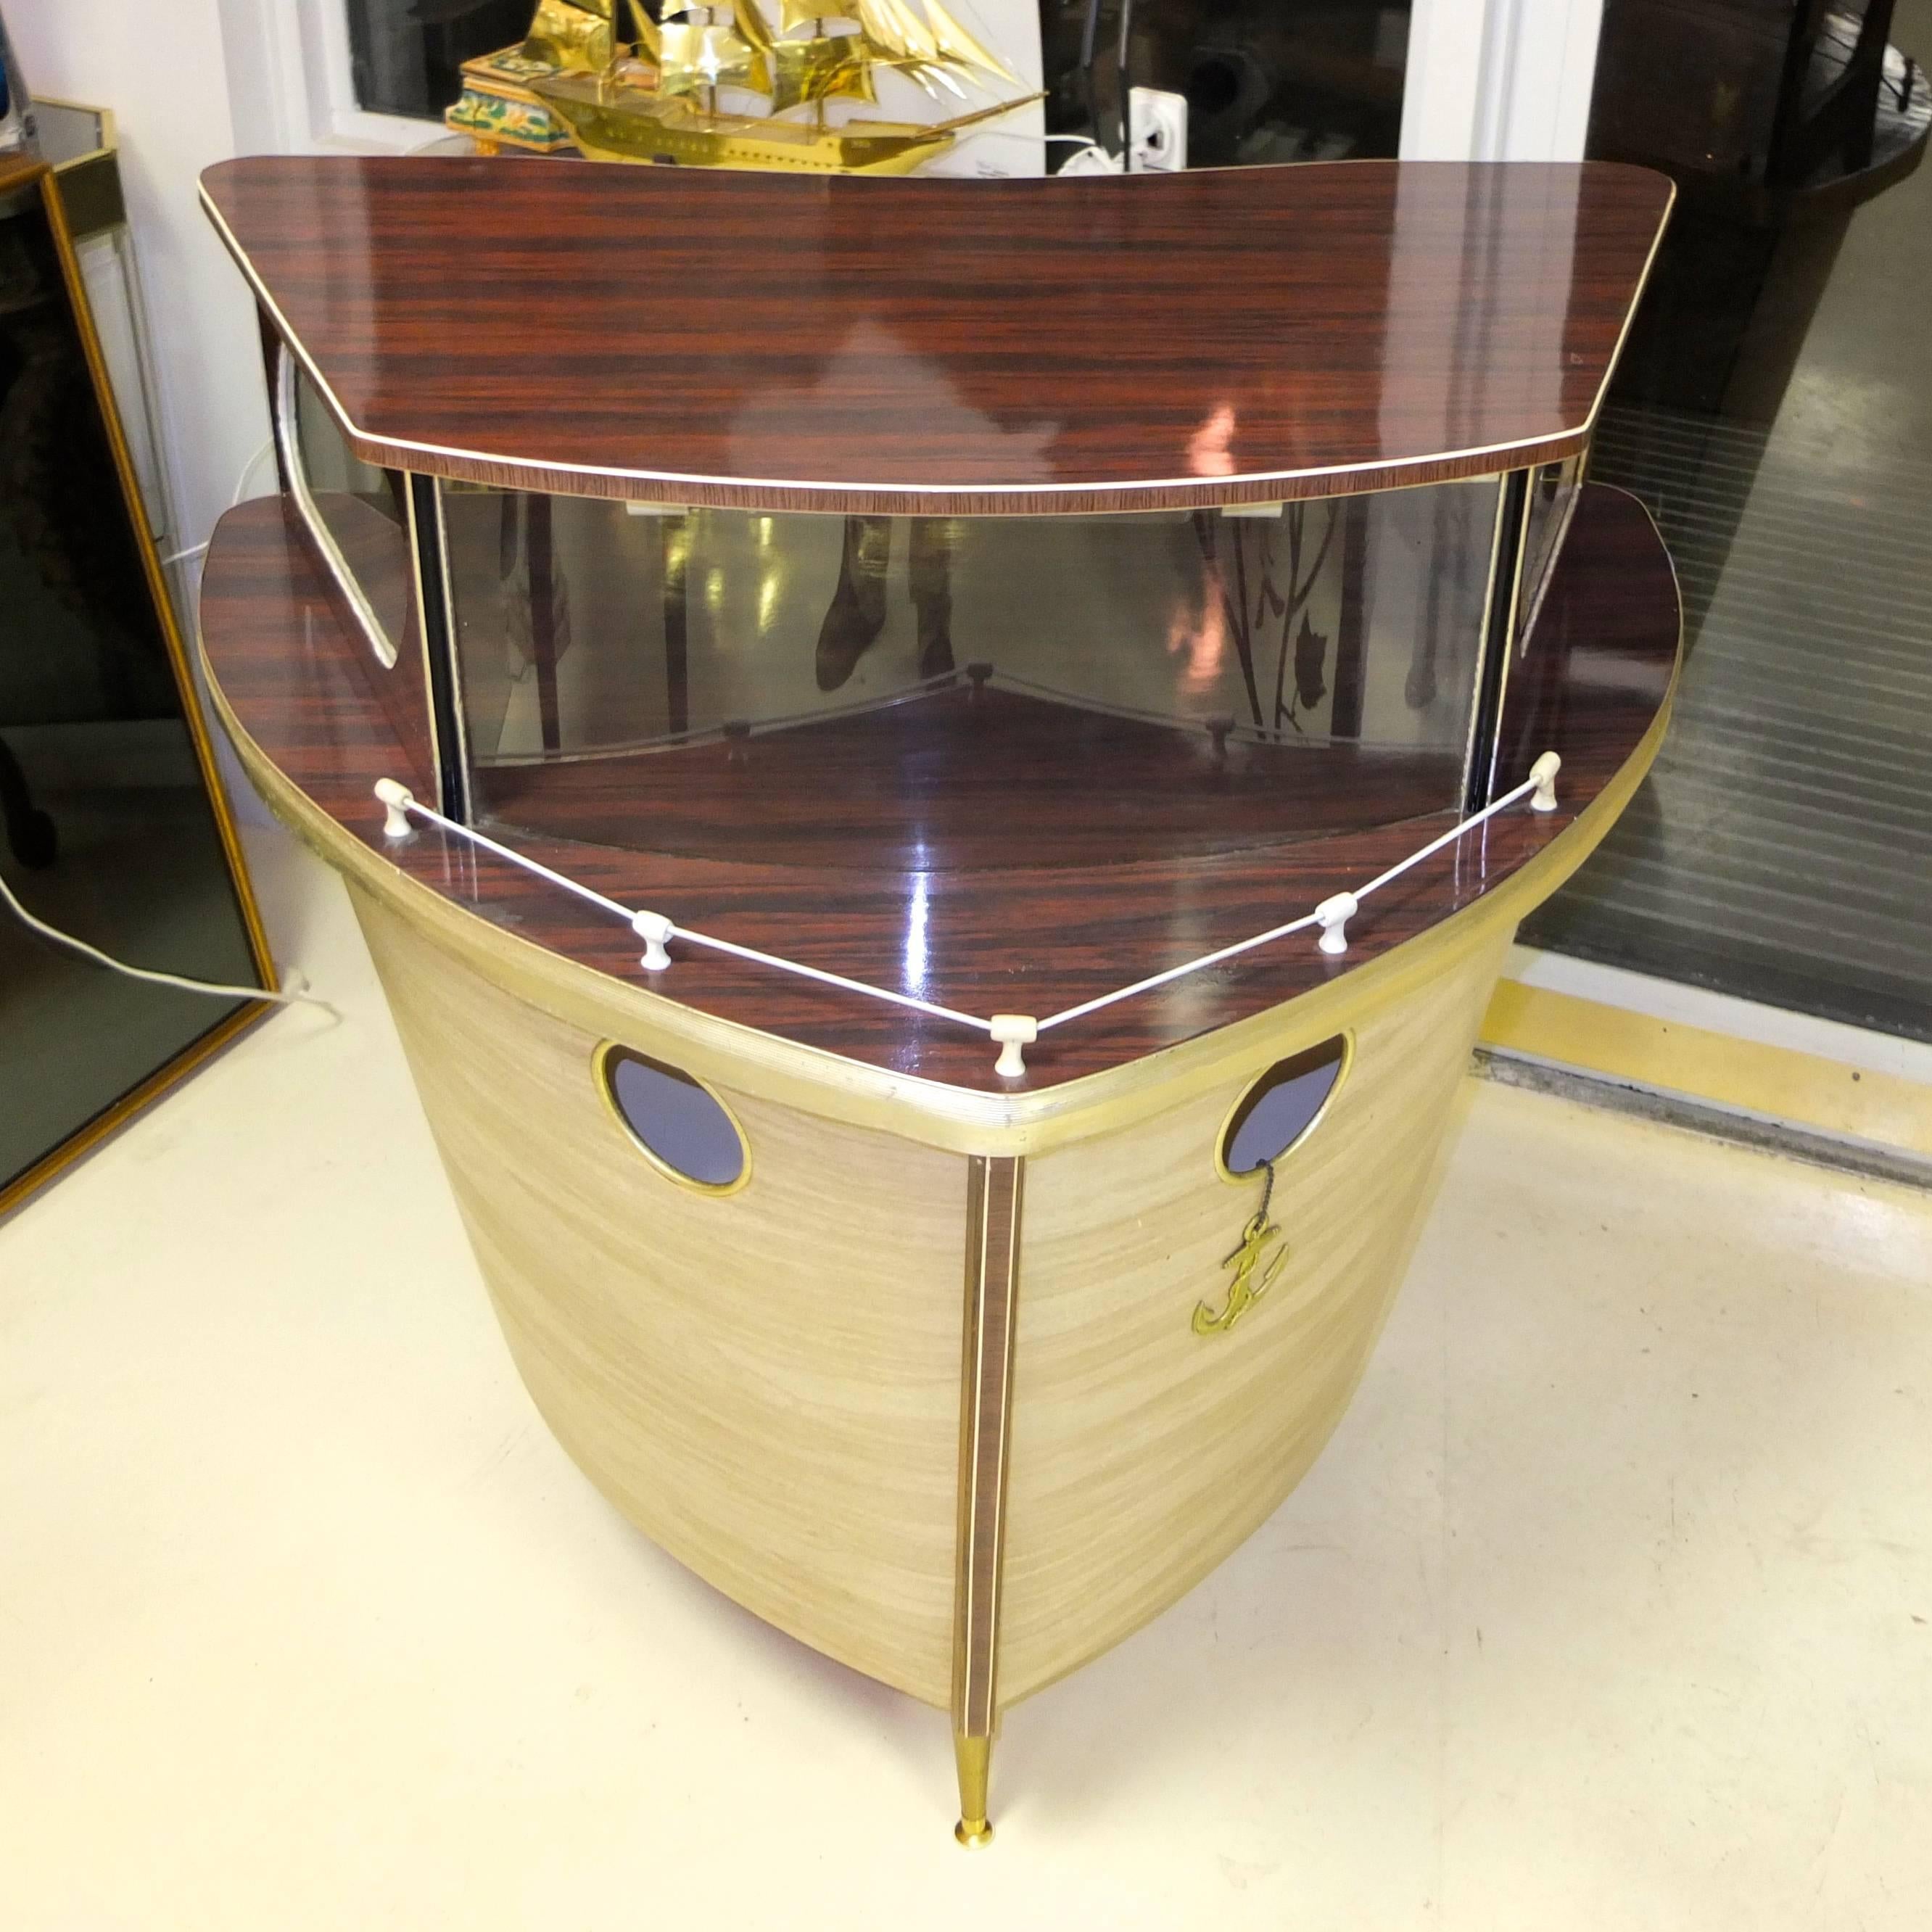 1950s standing cocktail bar by Umberto Mascagni of Bologna, Italy and imported to the UK (later, possibly produced by) by I. Barget Ltd. then retailed through Harrod's. 

Cocktail bar in the form of the bow of a cabin cruiser on three tapered